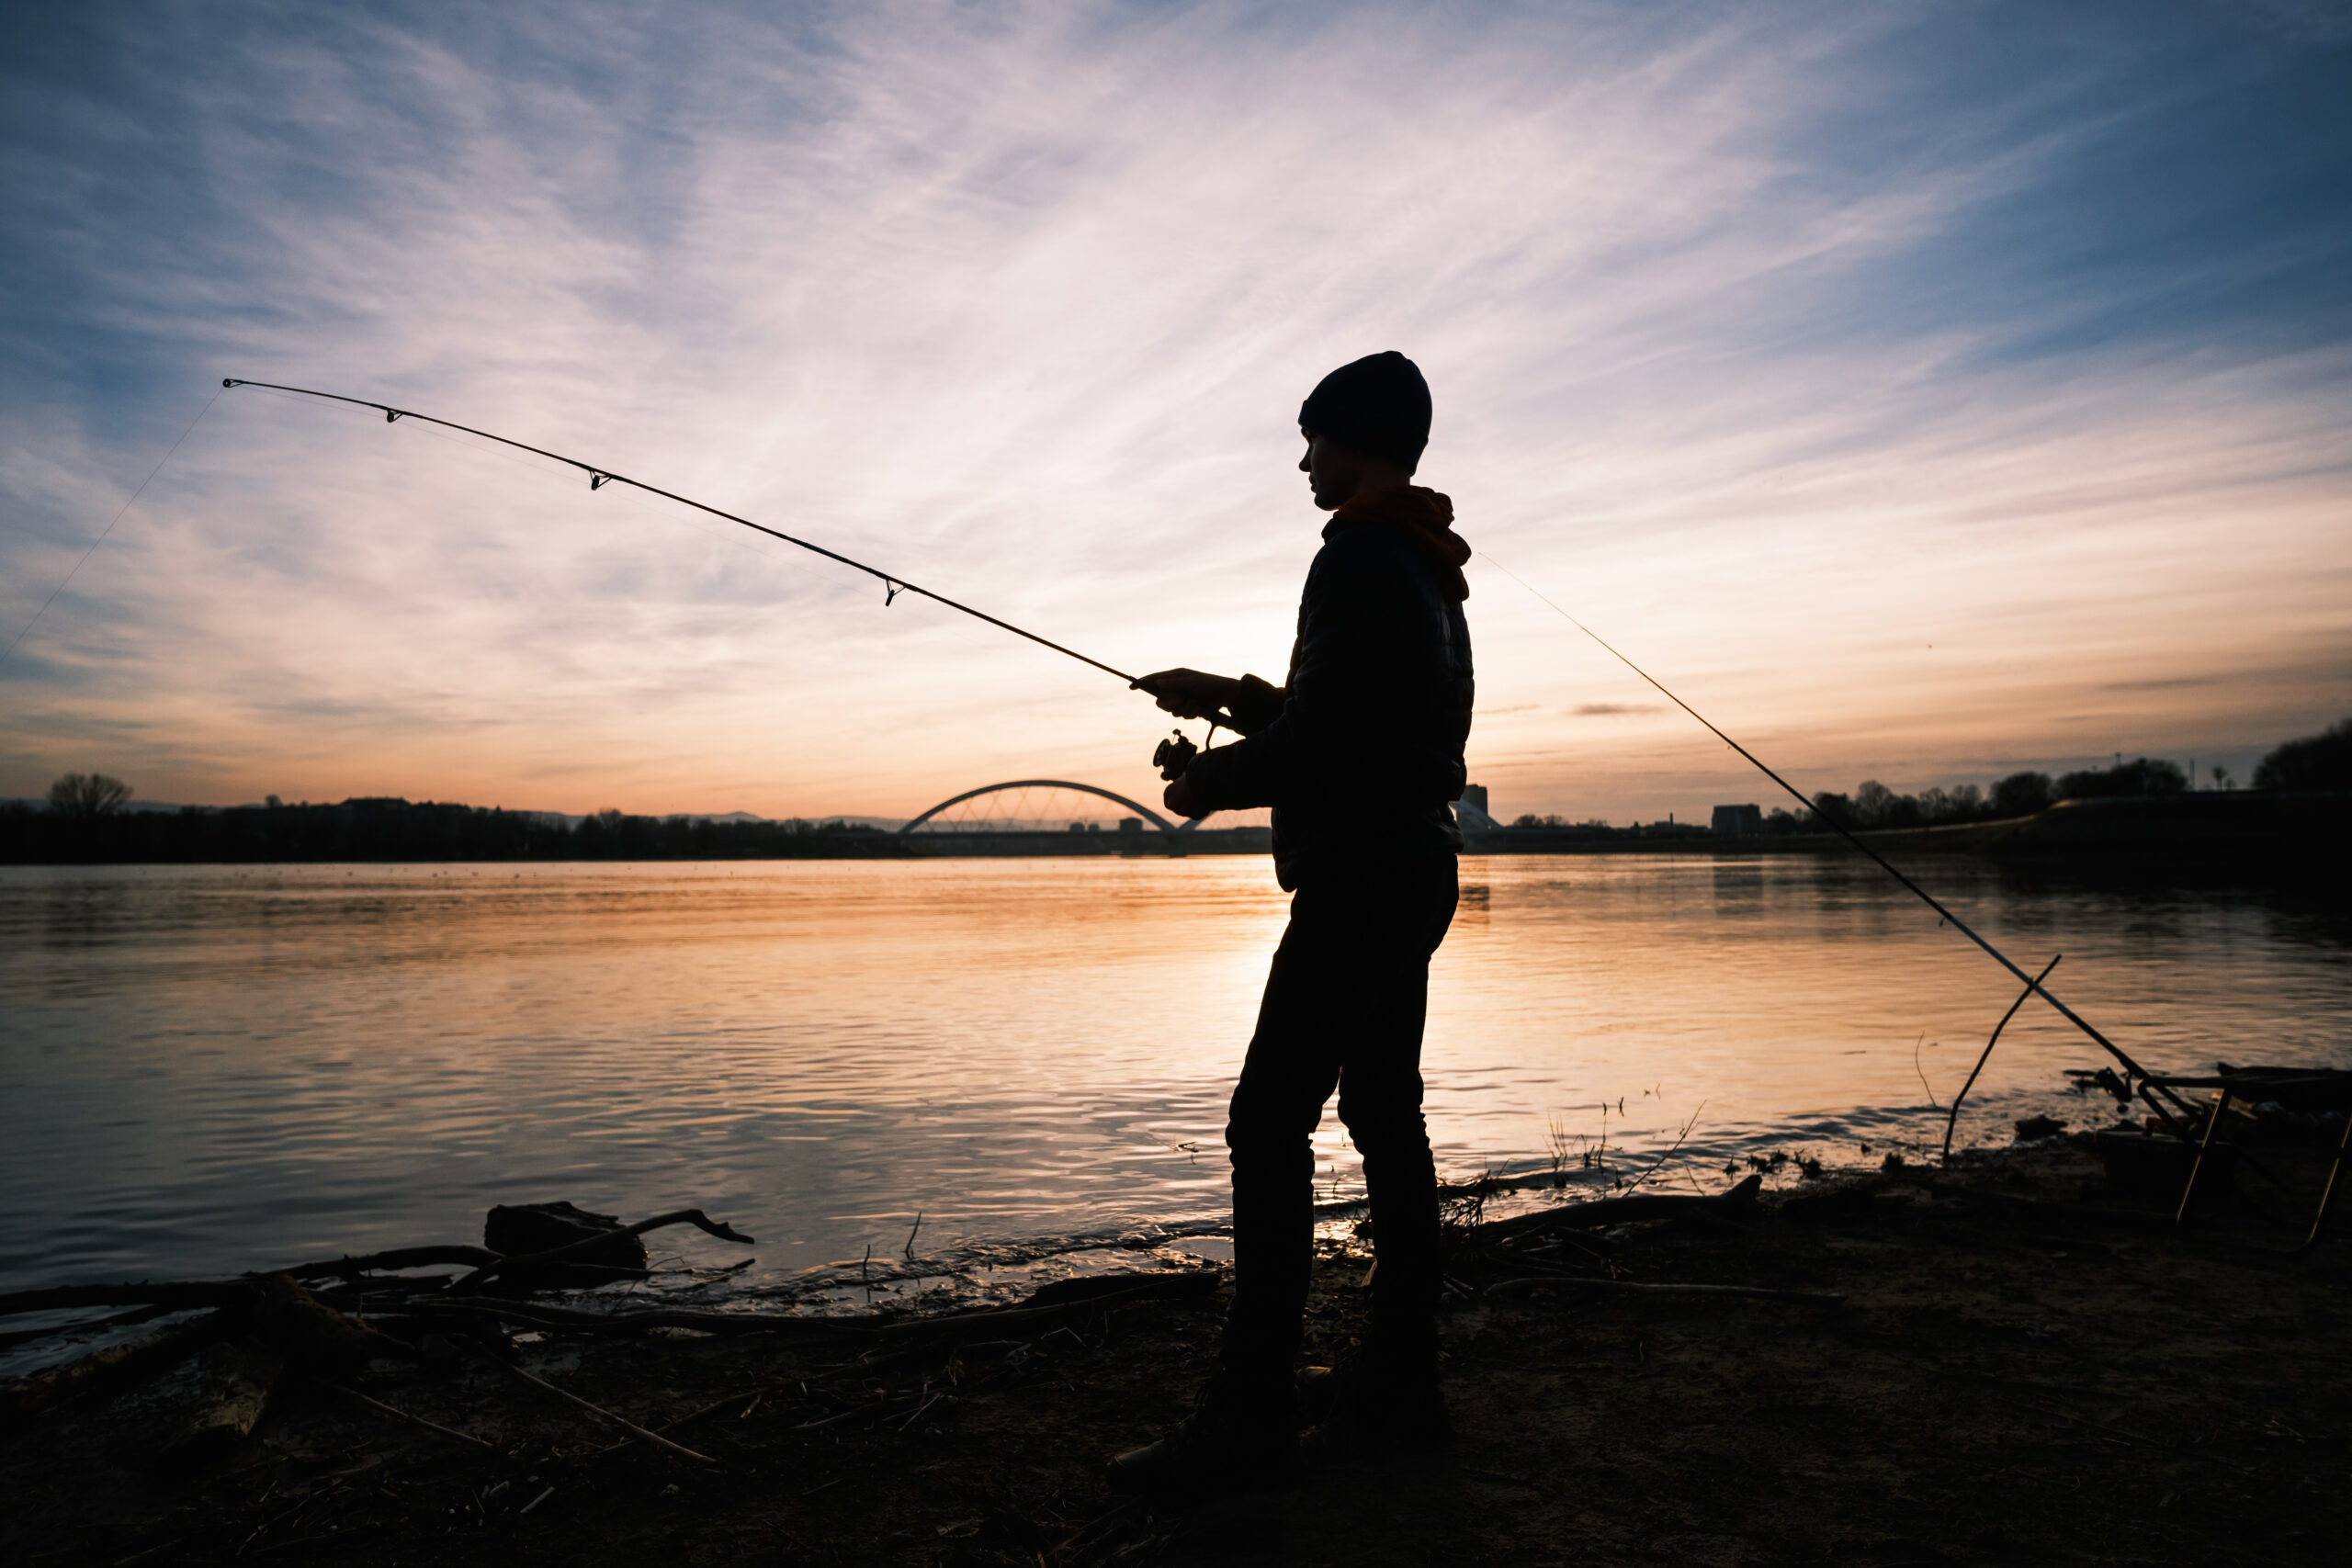 fanatic4fishing.com : What is the most common fishing rod?